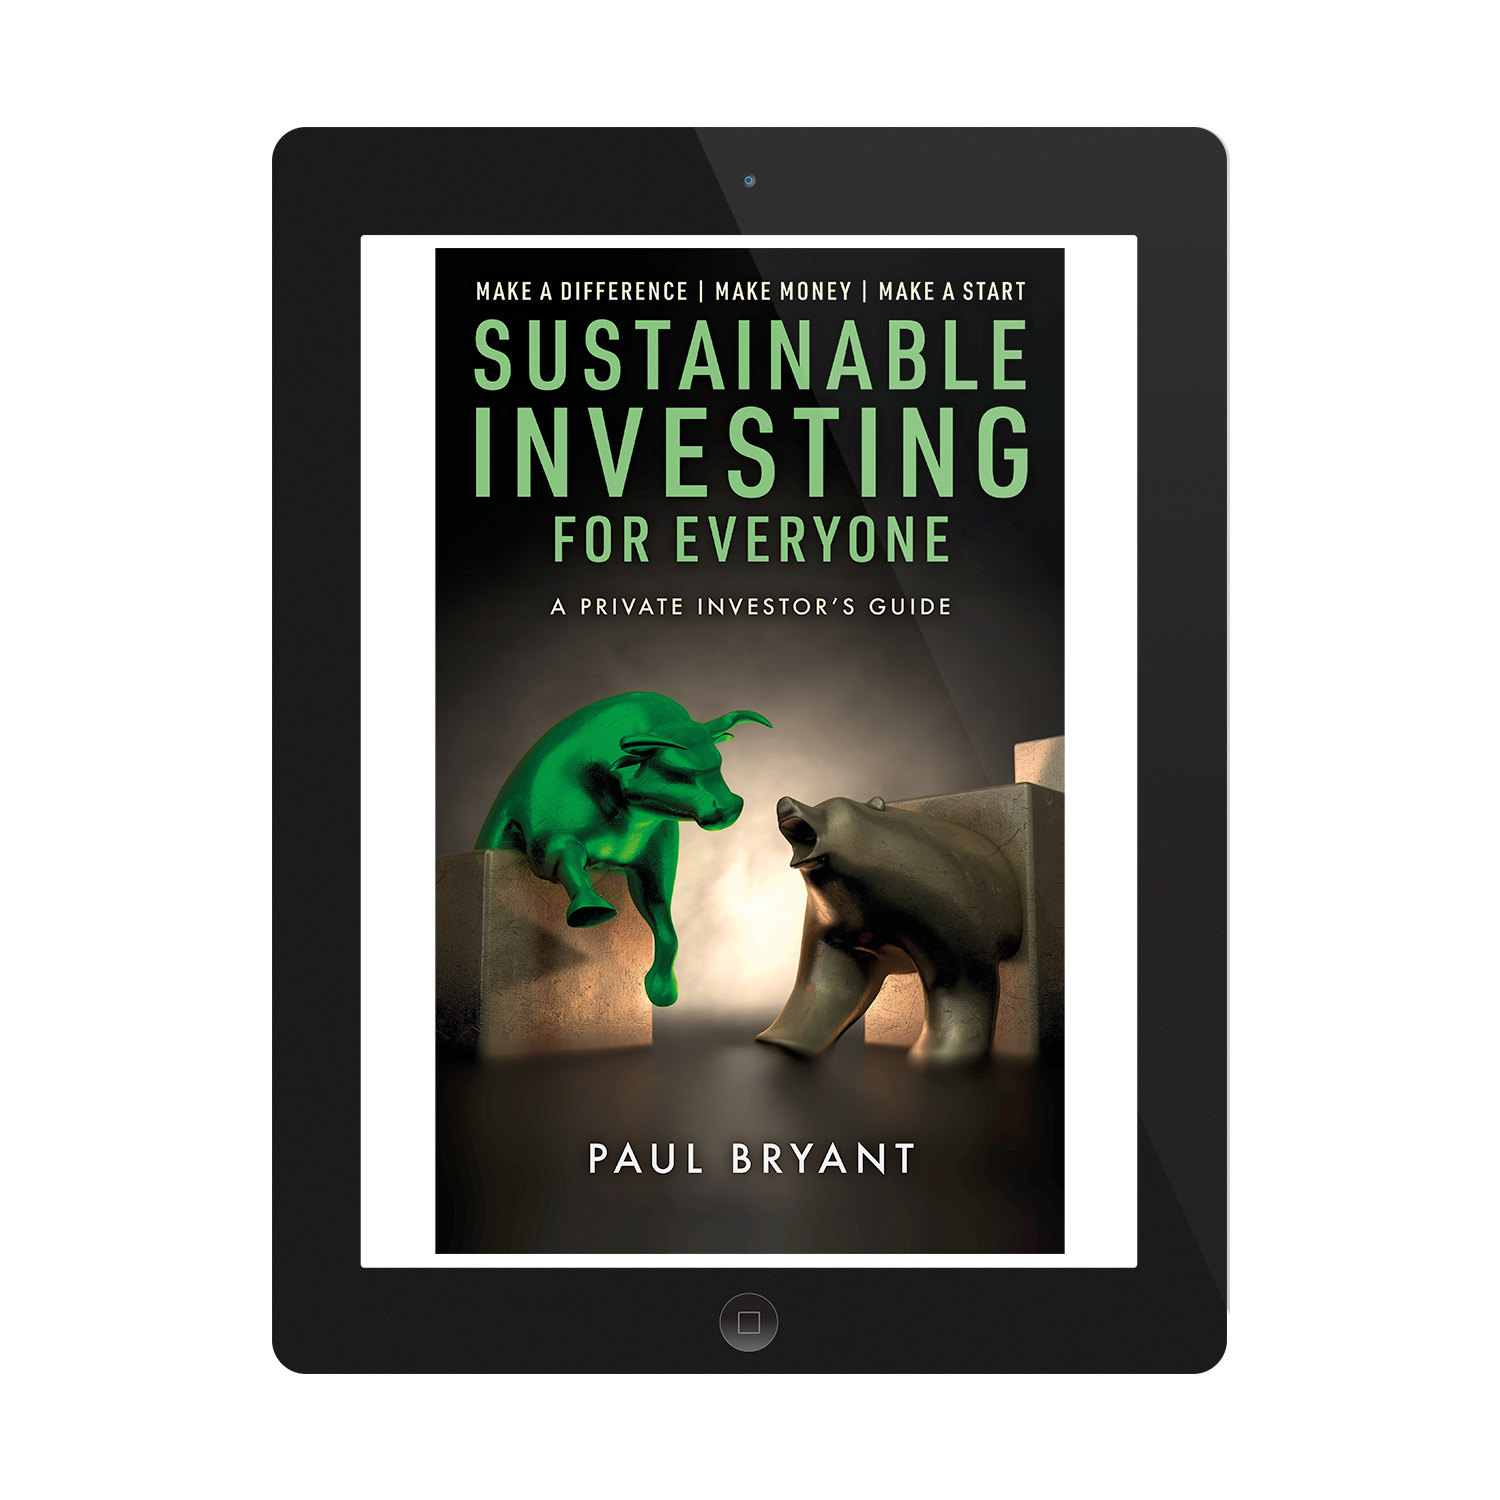 'Sustainable Investing For Everyone' is an excellent financial guide by Paul Bryant. The book cover design is by Mark Thomas. To learn more about what Mark could do for your book, please visit coverness.com.